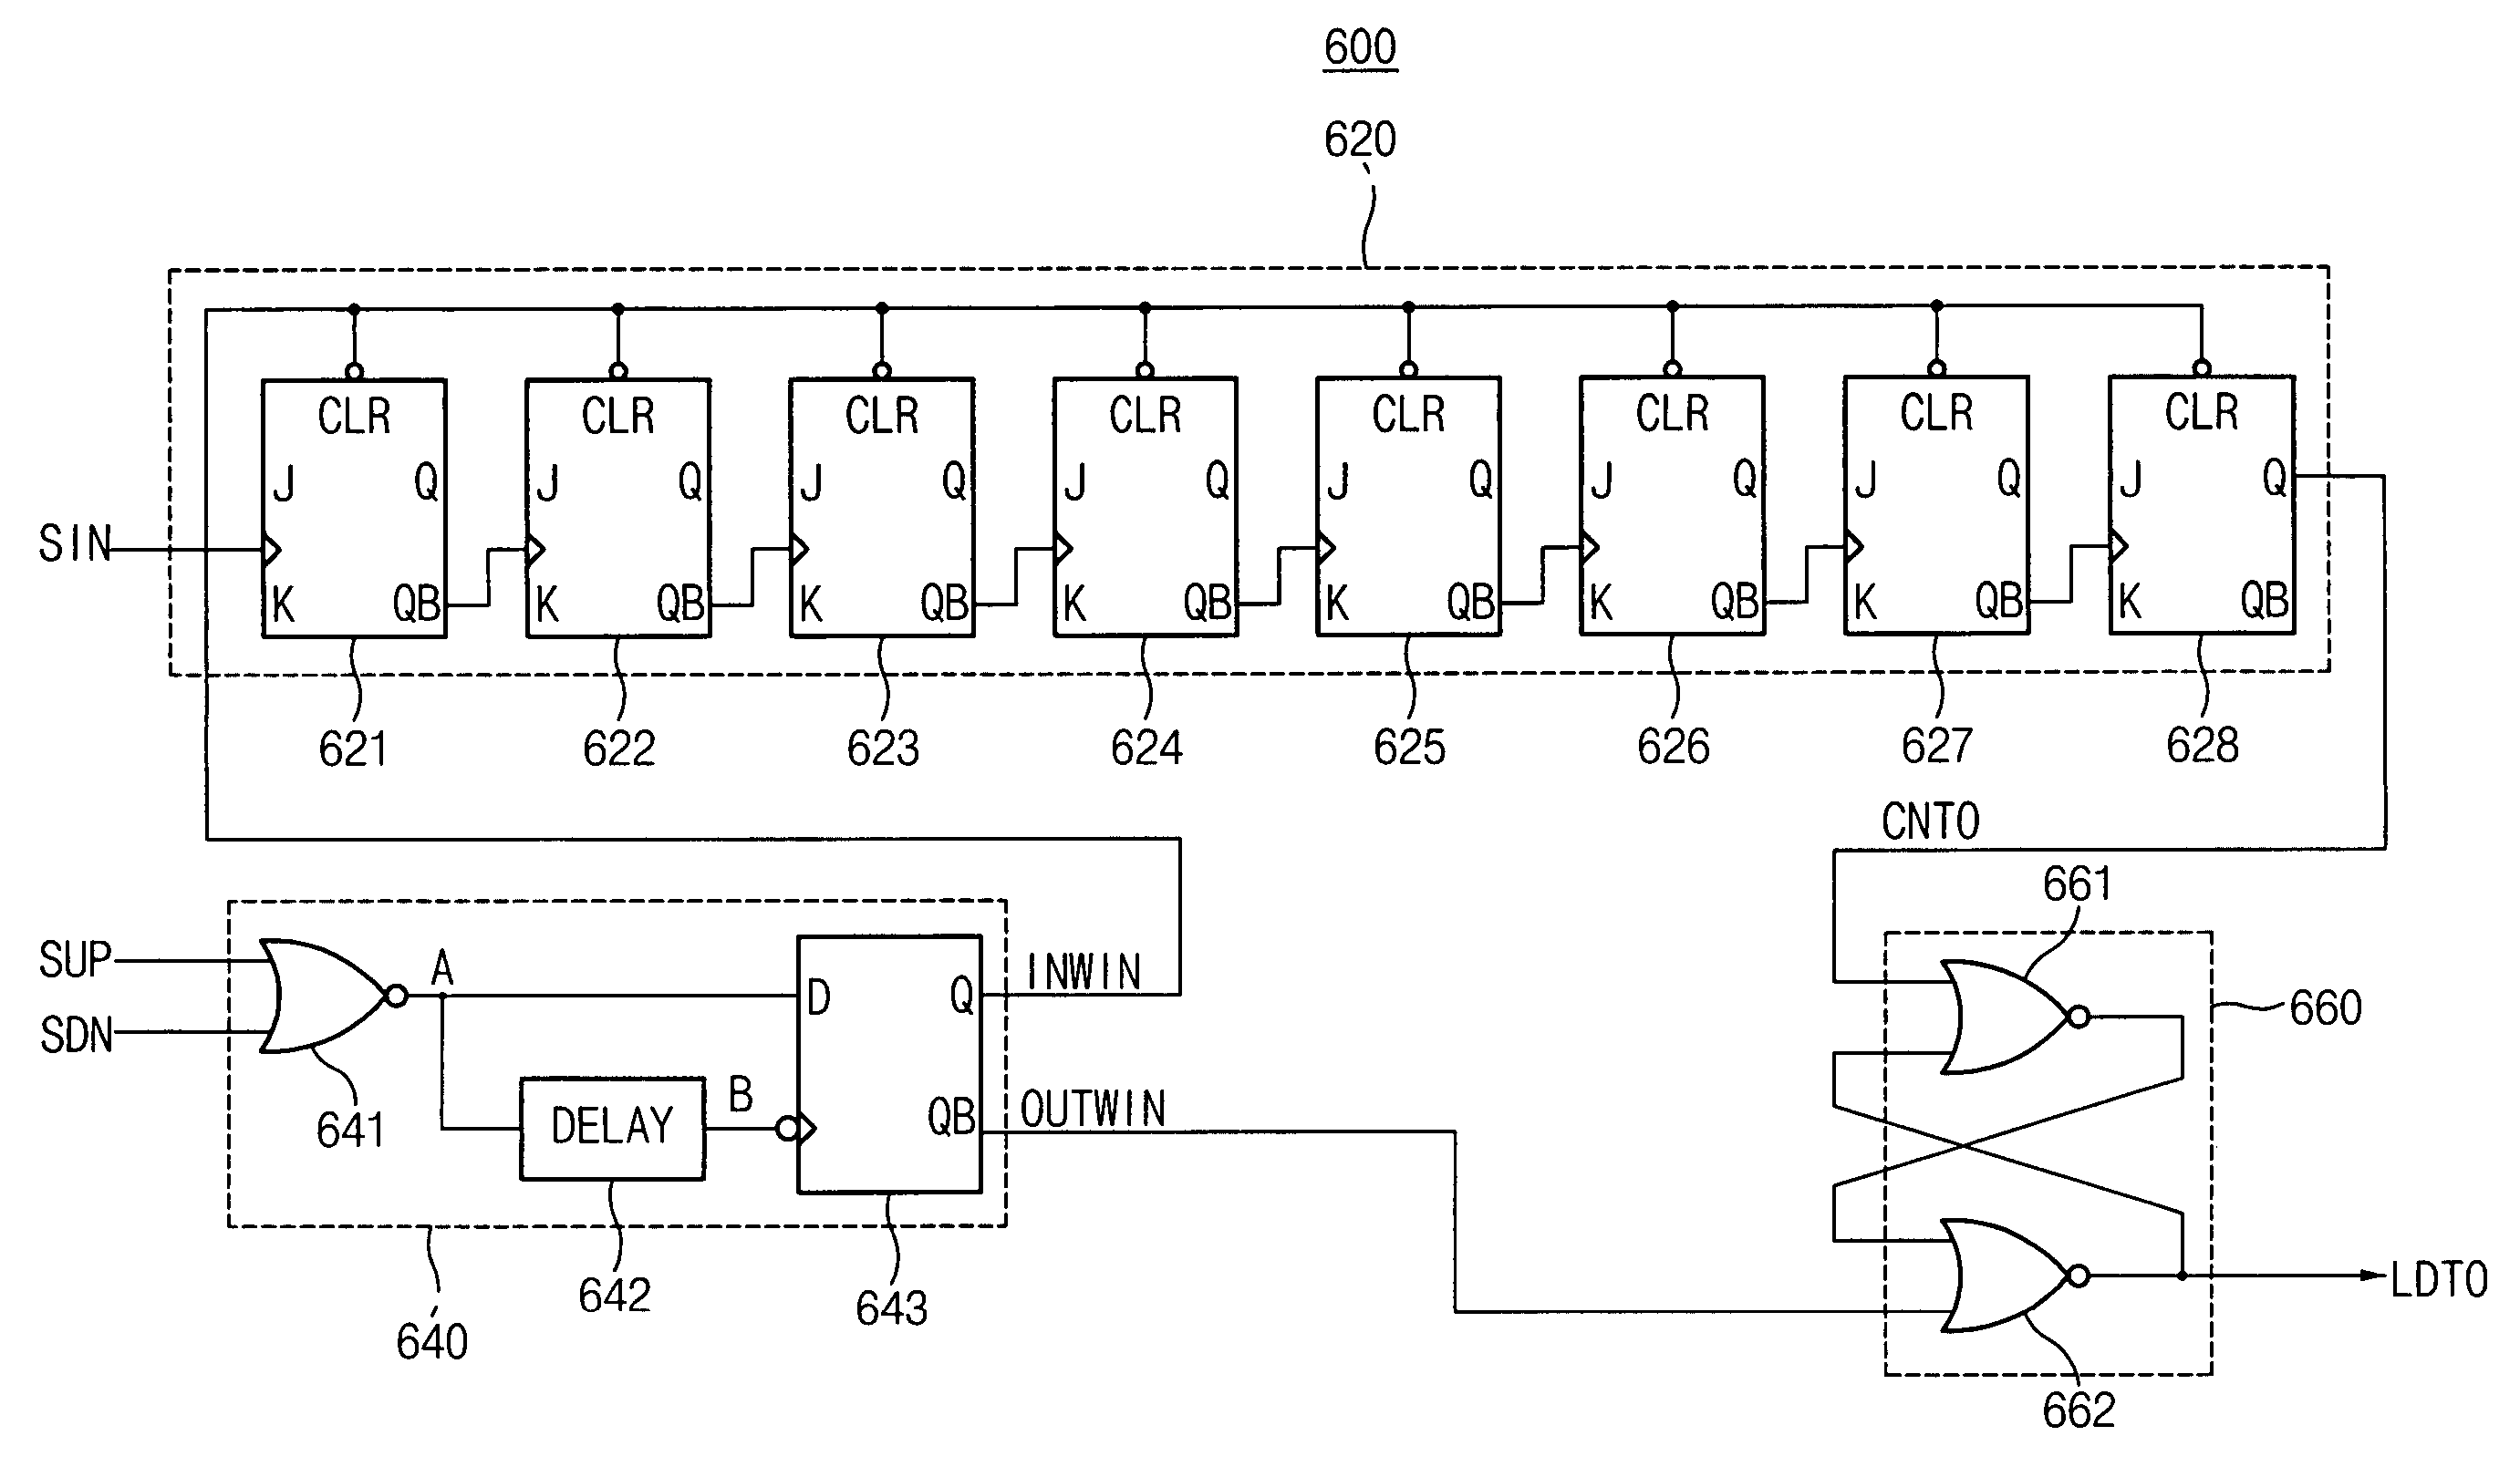 Circuits and methods for detecting phase lock